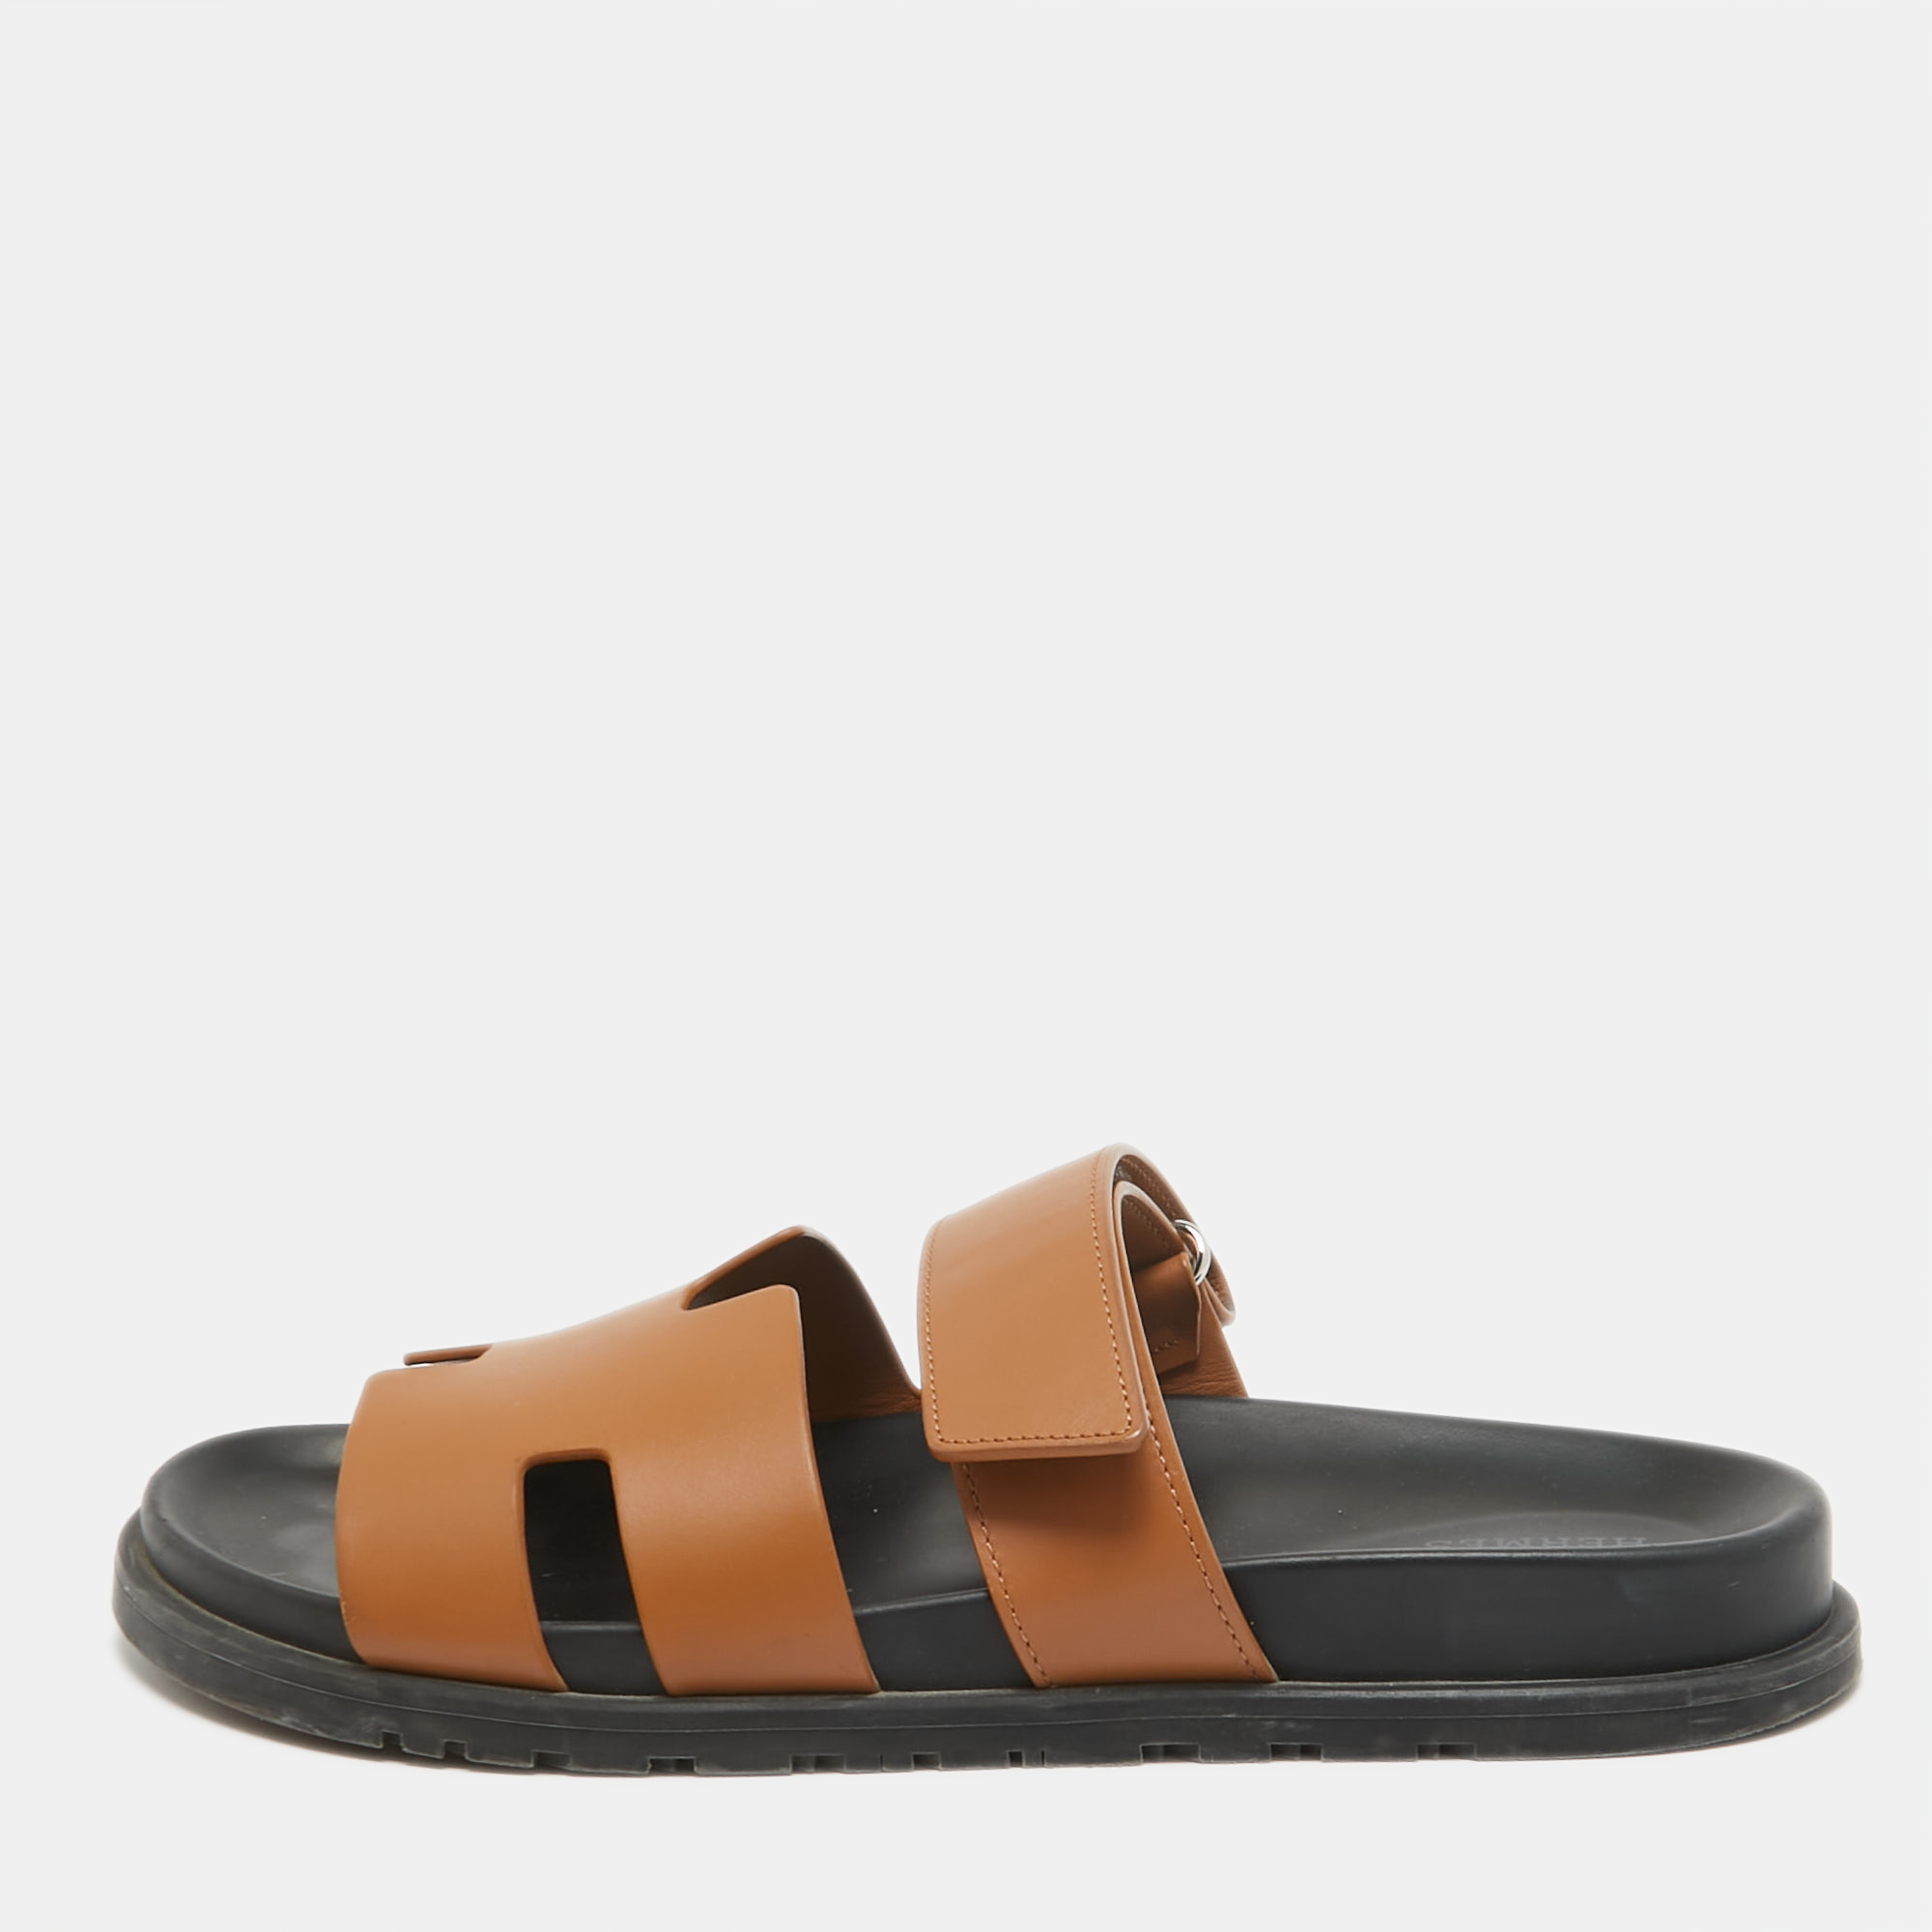 Hermes brown leather chypre sandals size 41.5